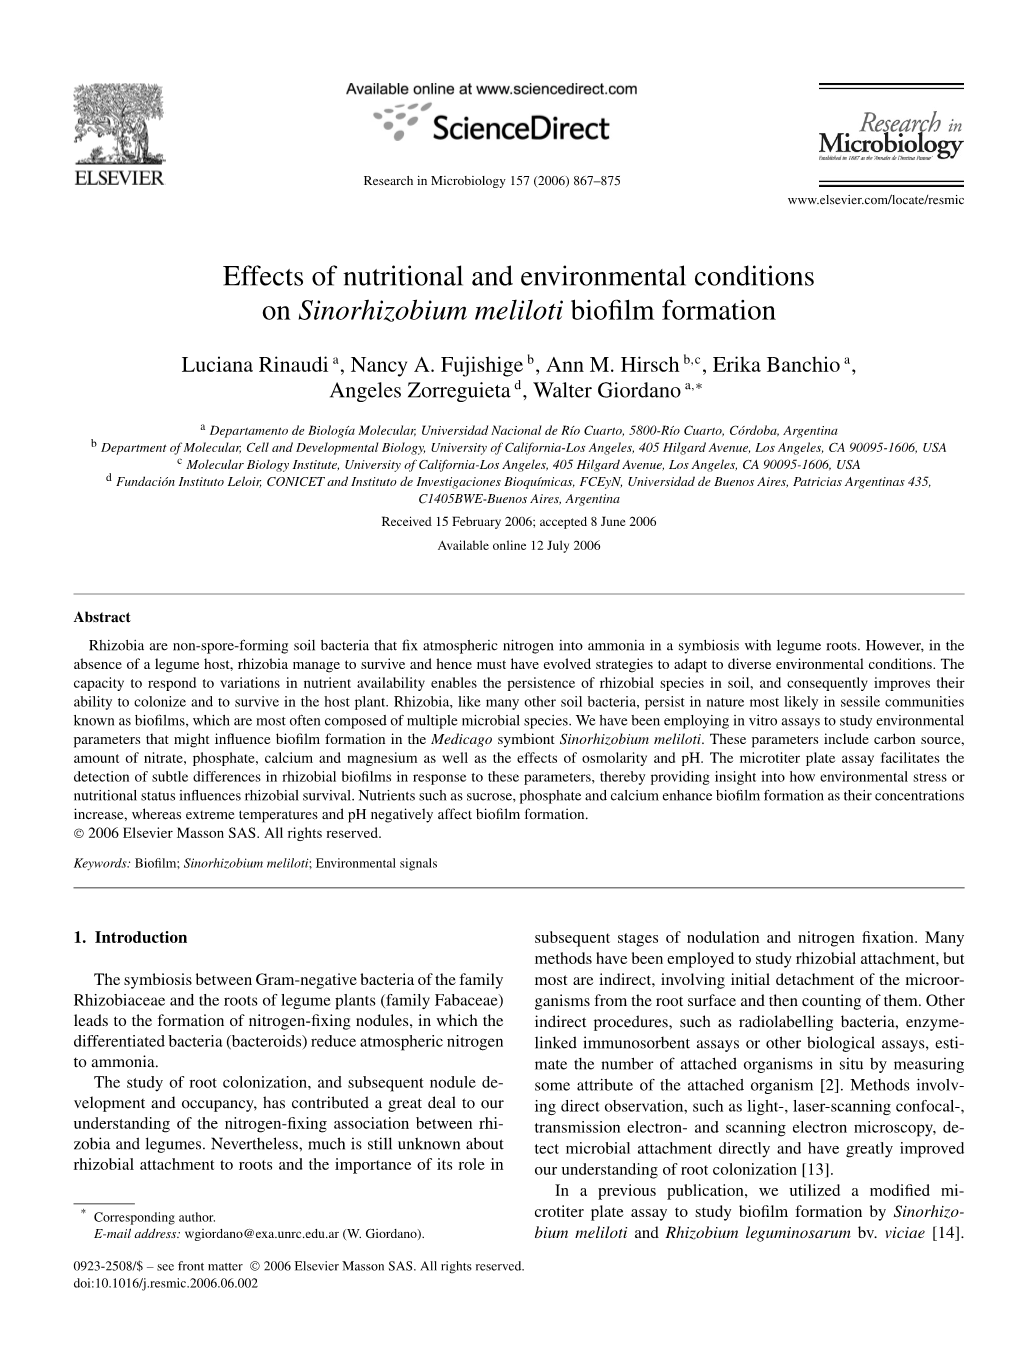 Effects of Nutritional and Environmental Conditions on Sinorhizobium Meliloti Bioﬁlm Formation